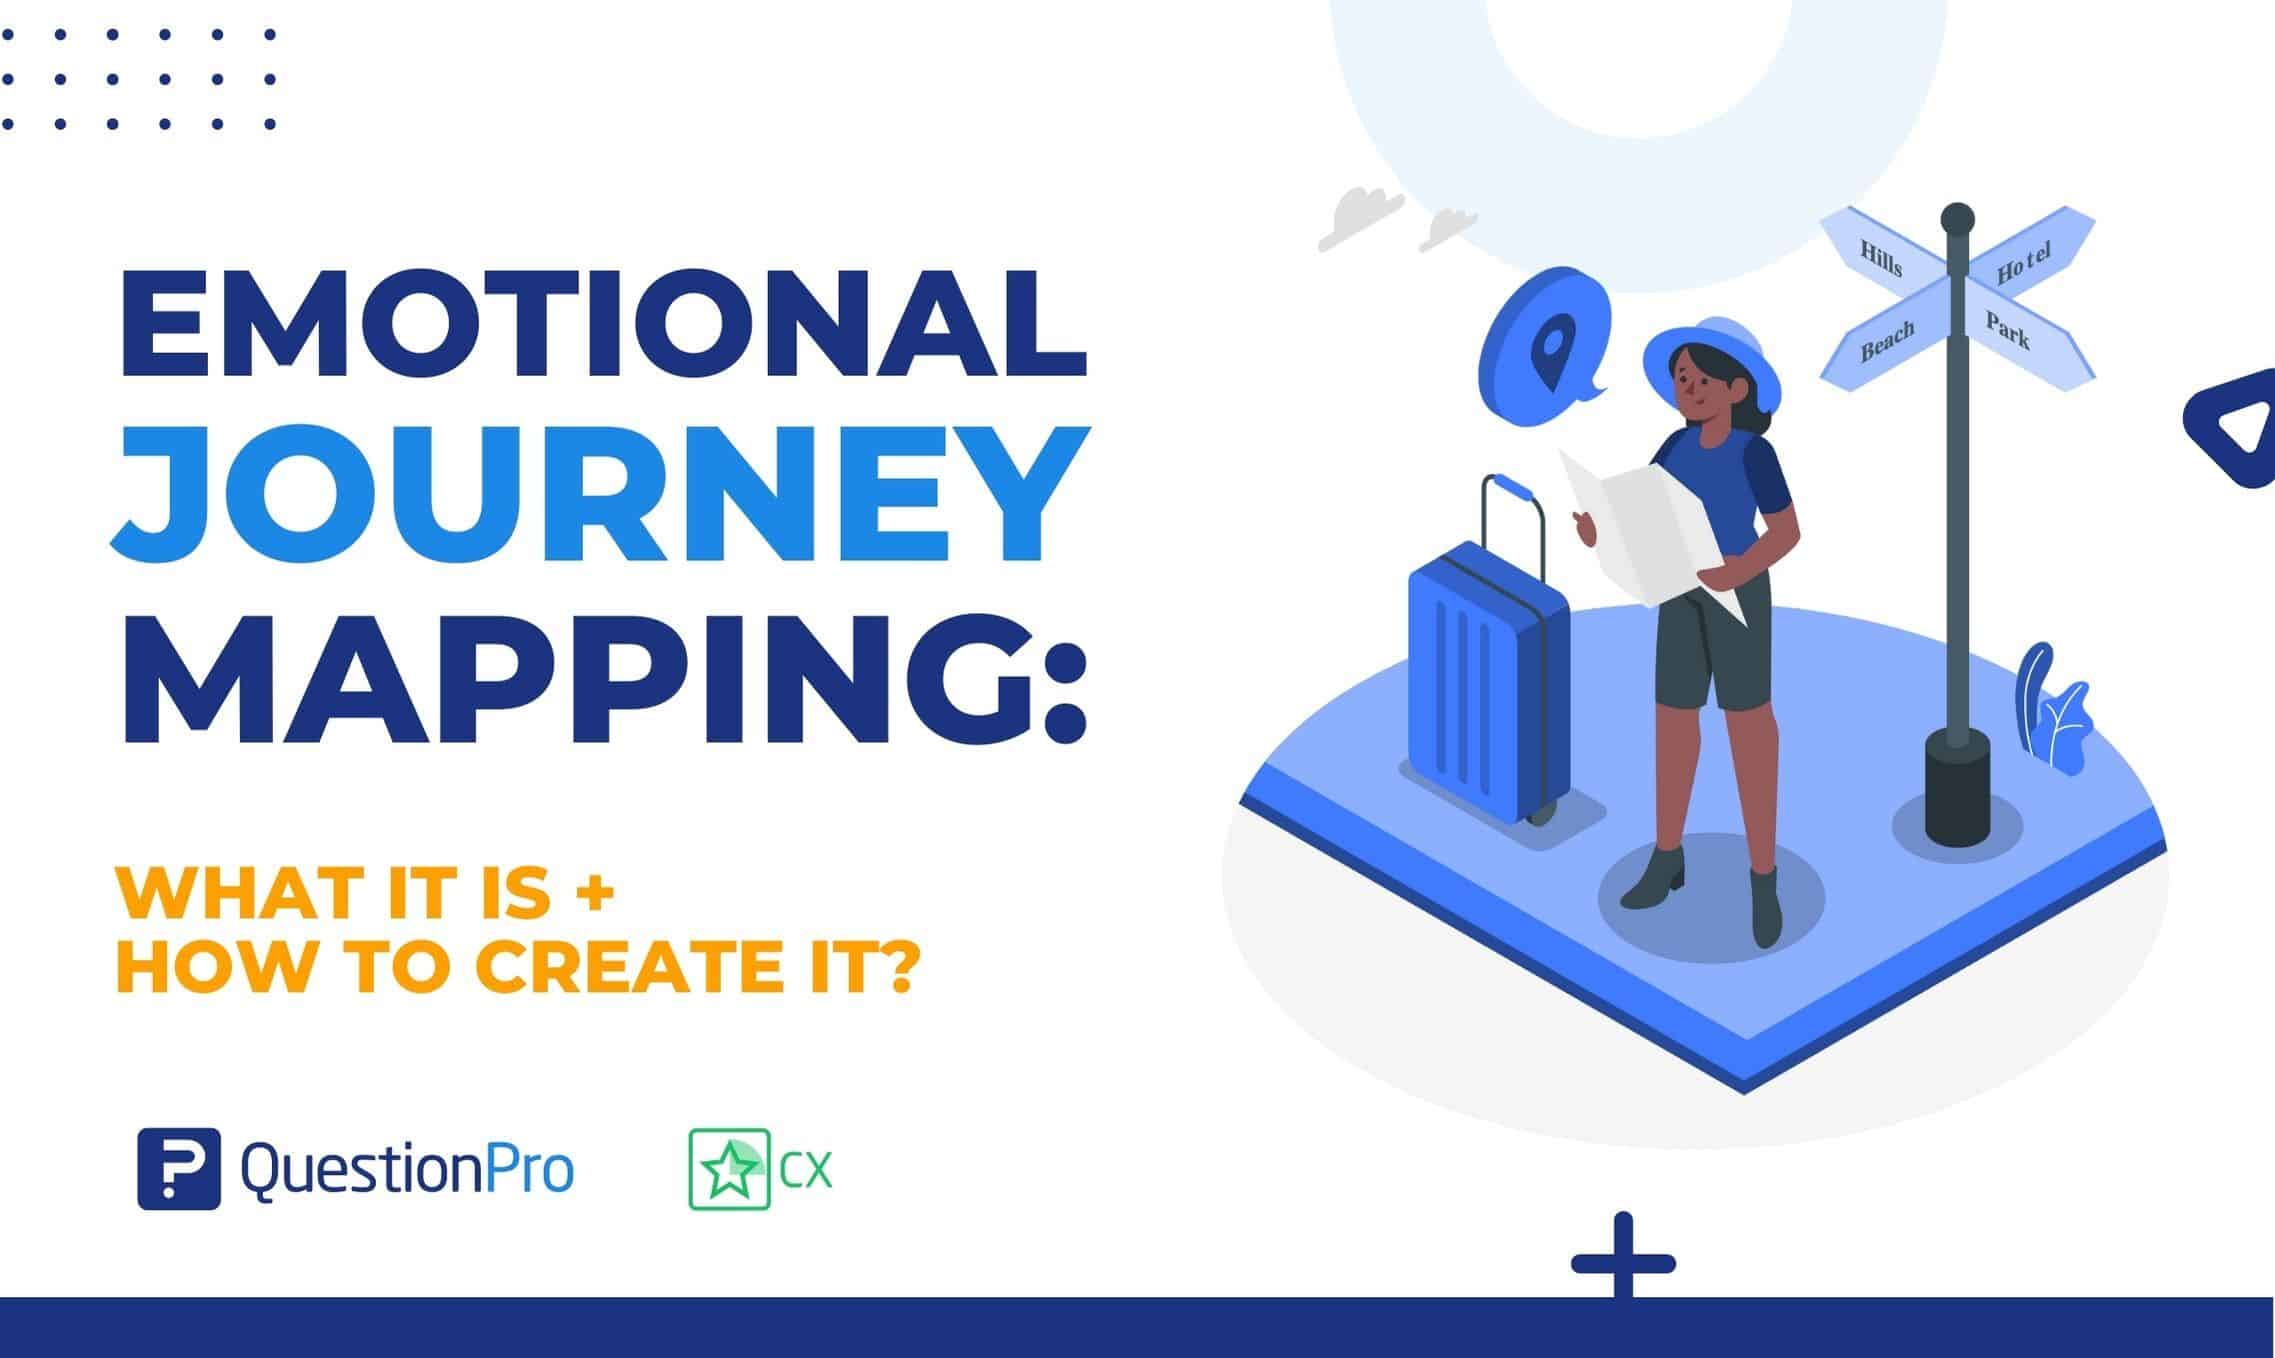 Emotional journey mapping visualizes a user's emotional experience with a company or product. Learn how to create one to make UX easier.